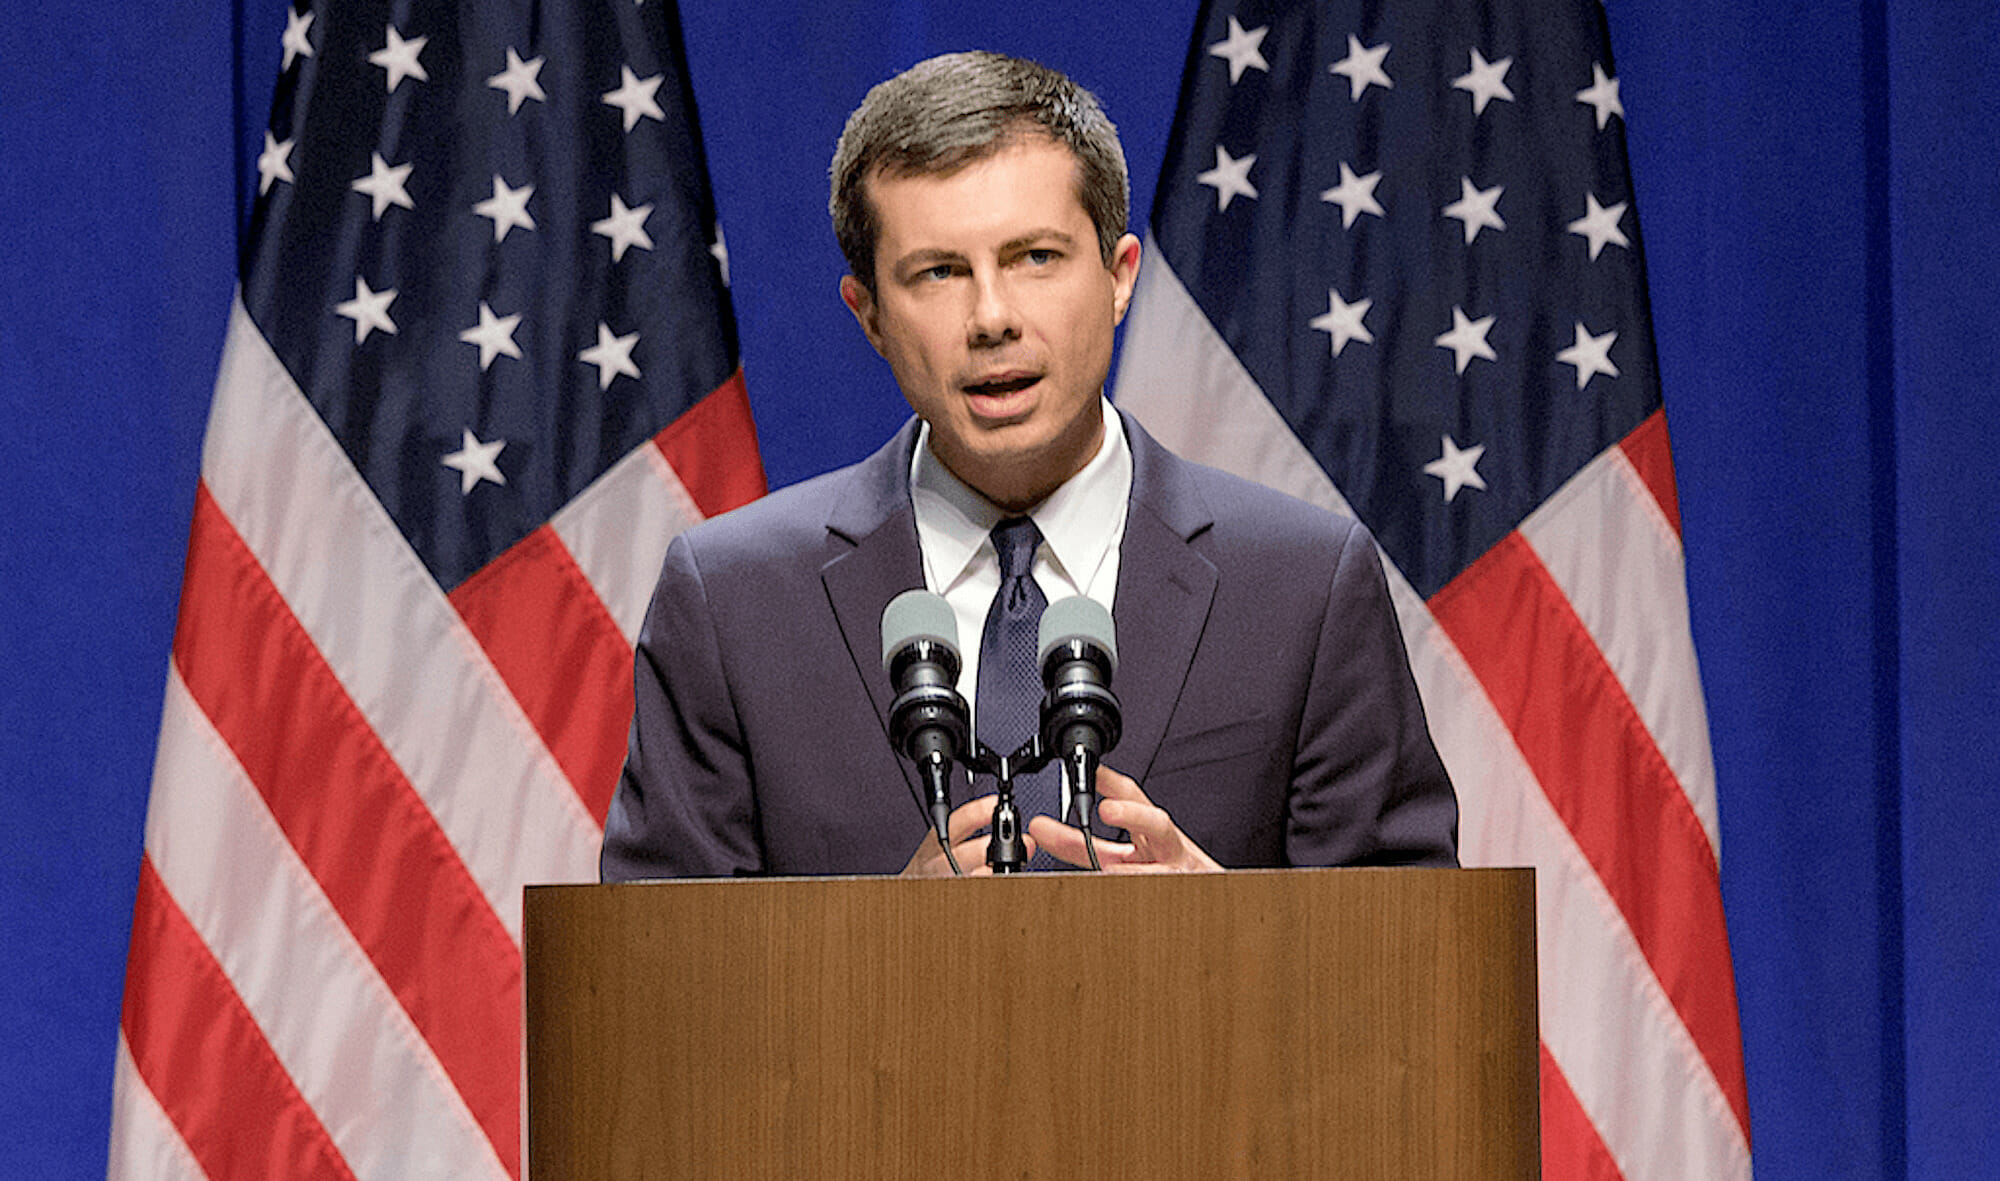 39 HQ Images Pete Buttigieg Events : Pete Buttigieg attends fundraiser events in Providence ...